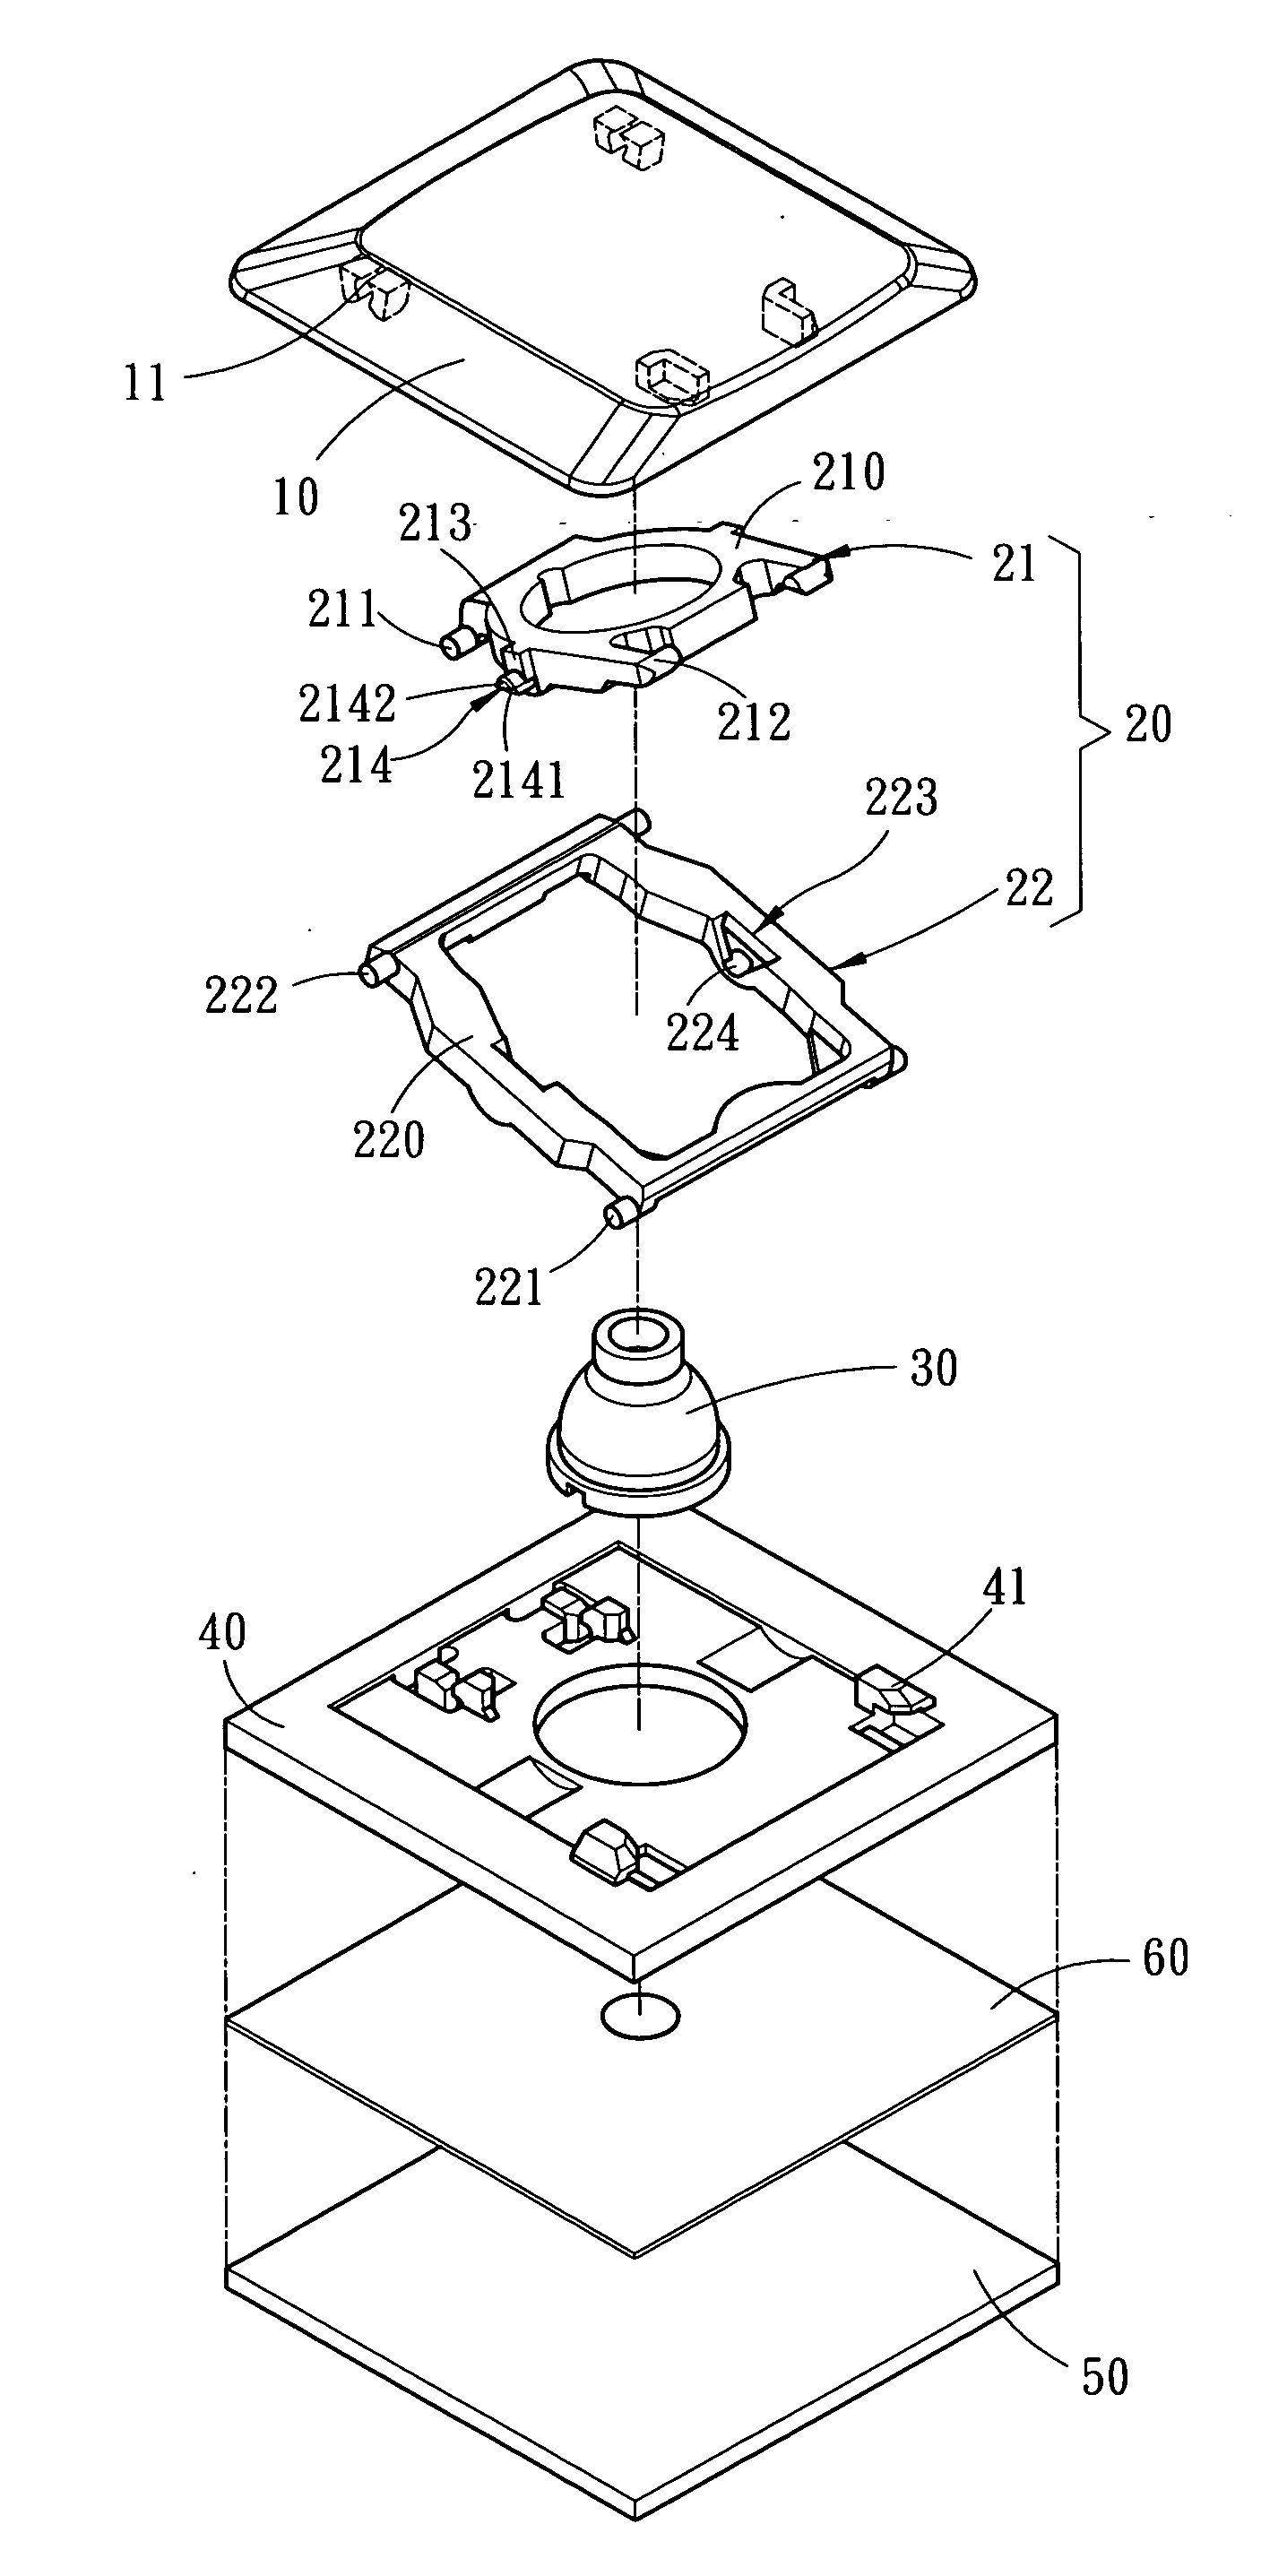 Pushbutton mechanism for keyboards